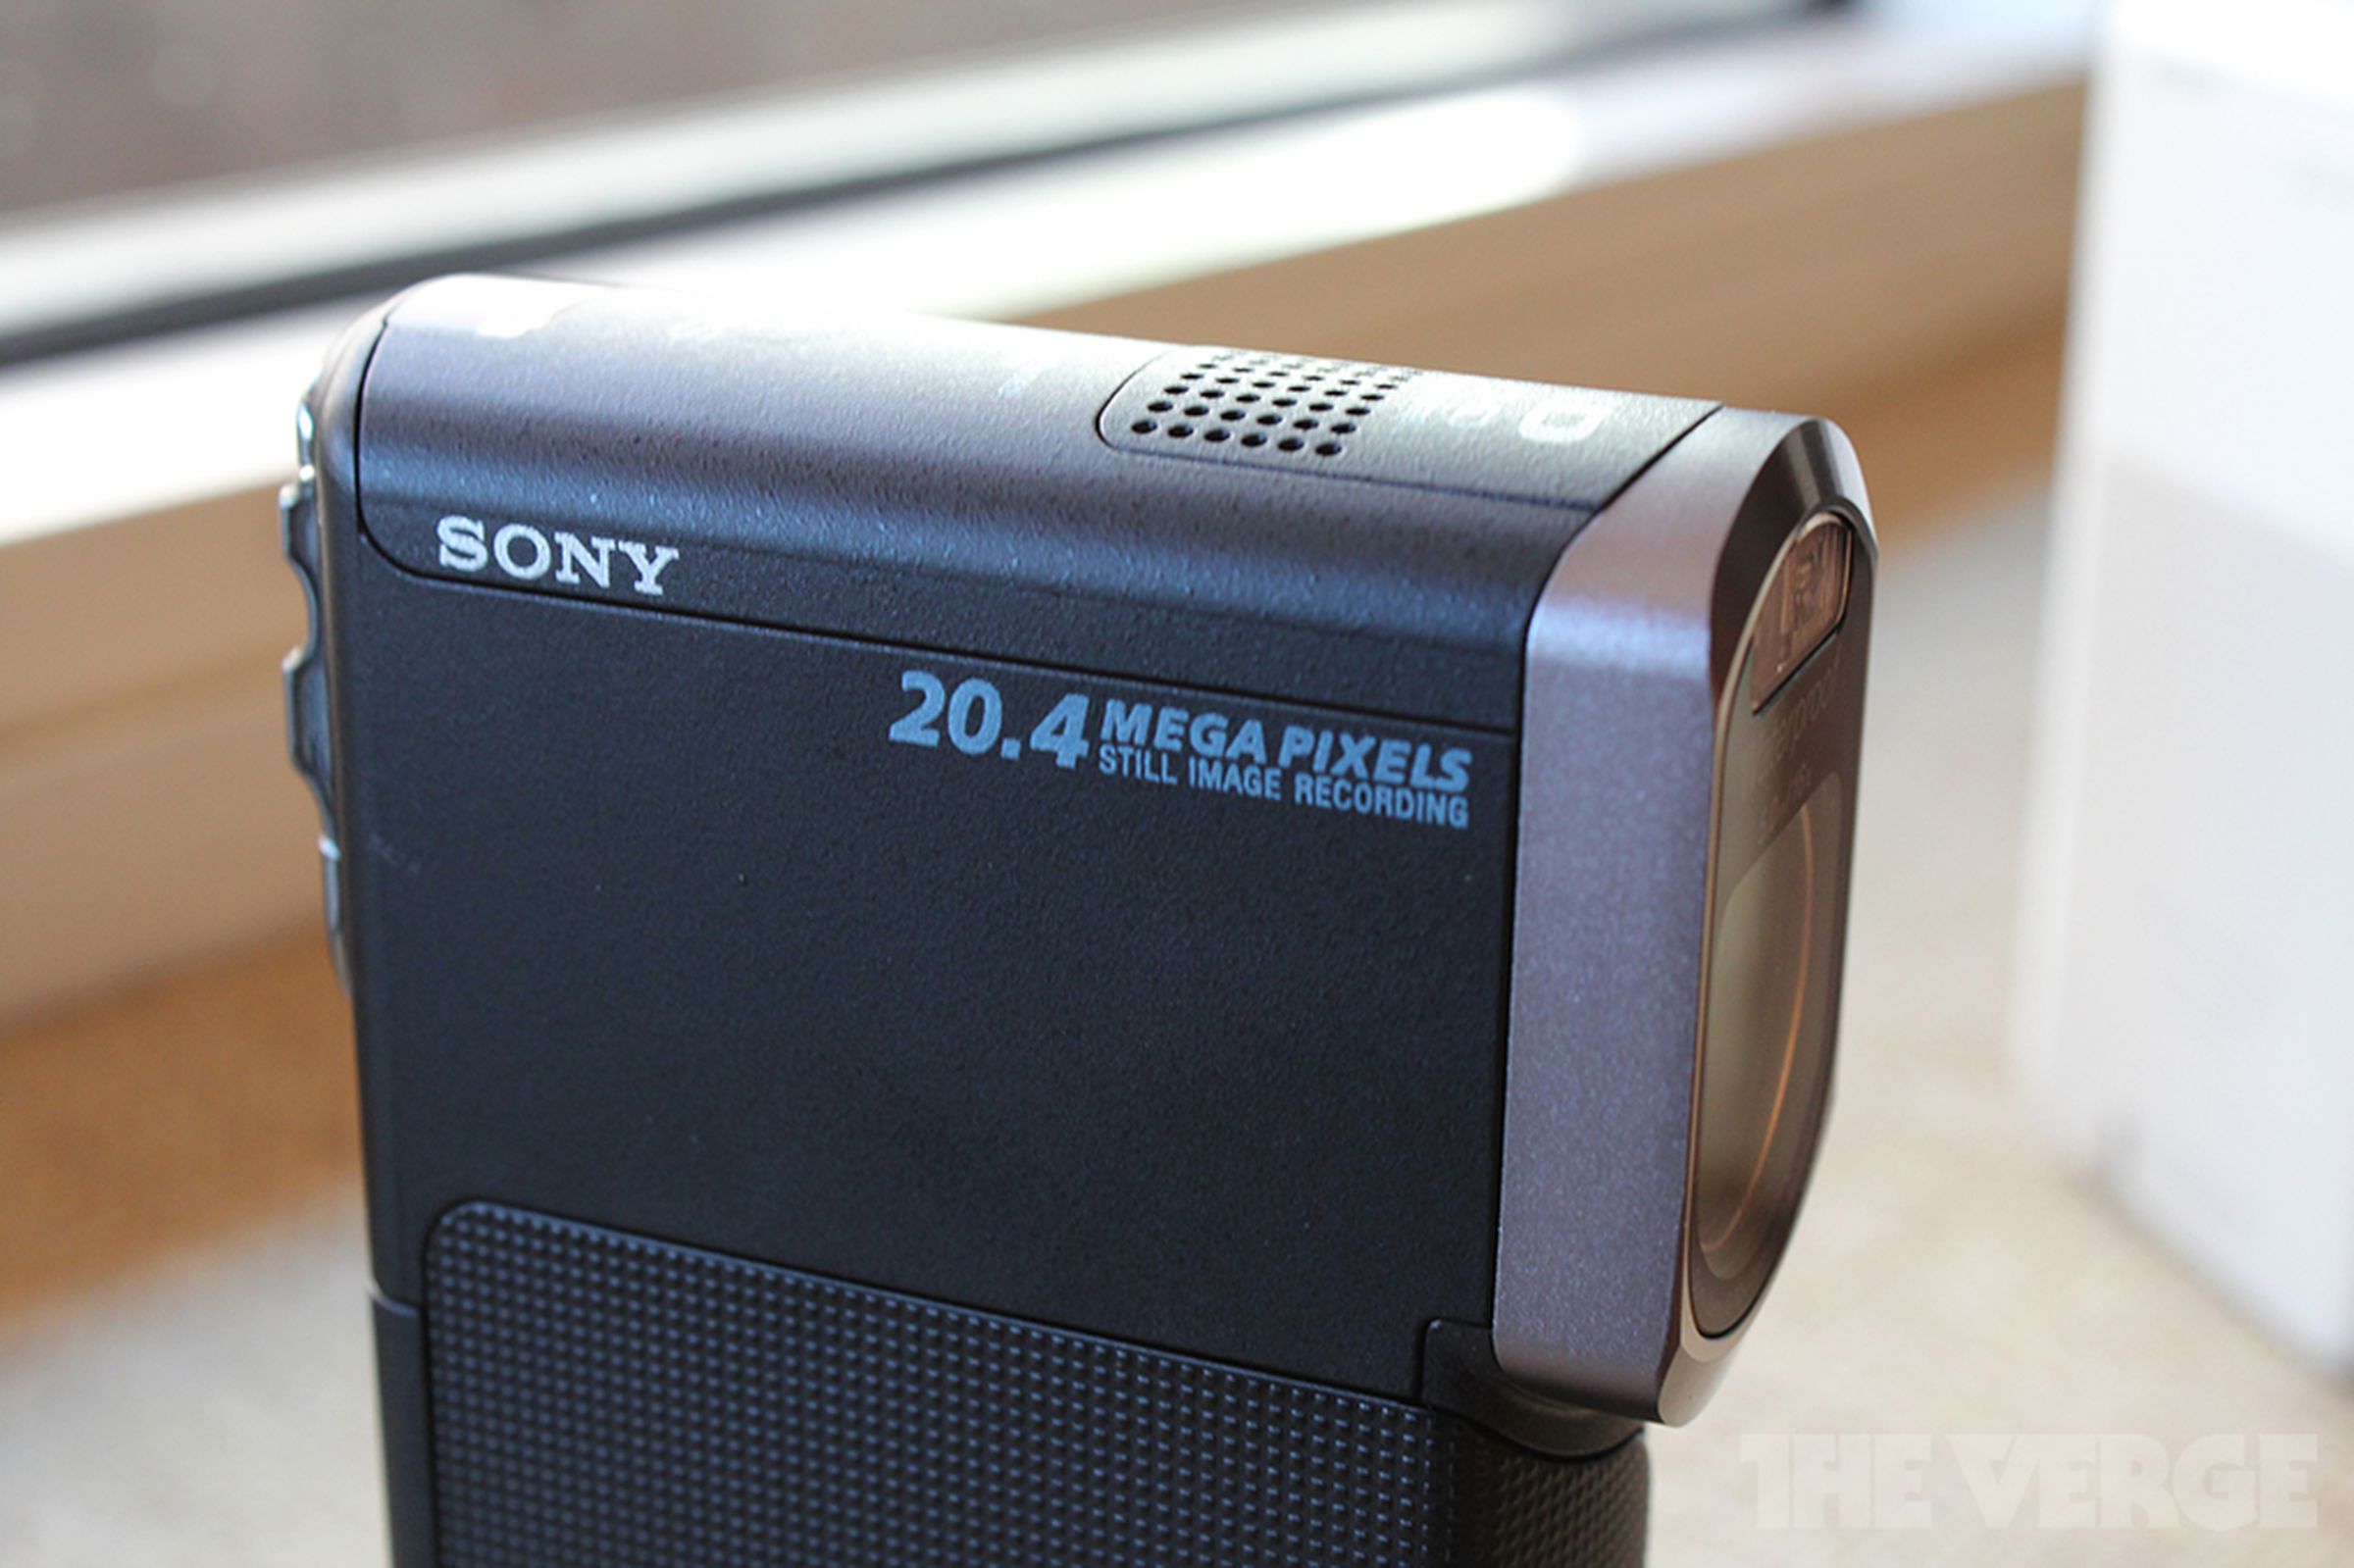 Sony Handycam HDR-GW77V hands on pictures